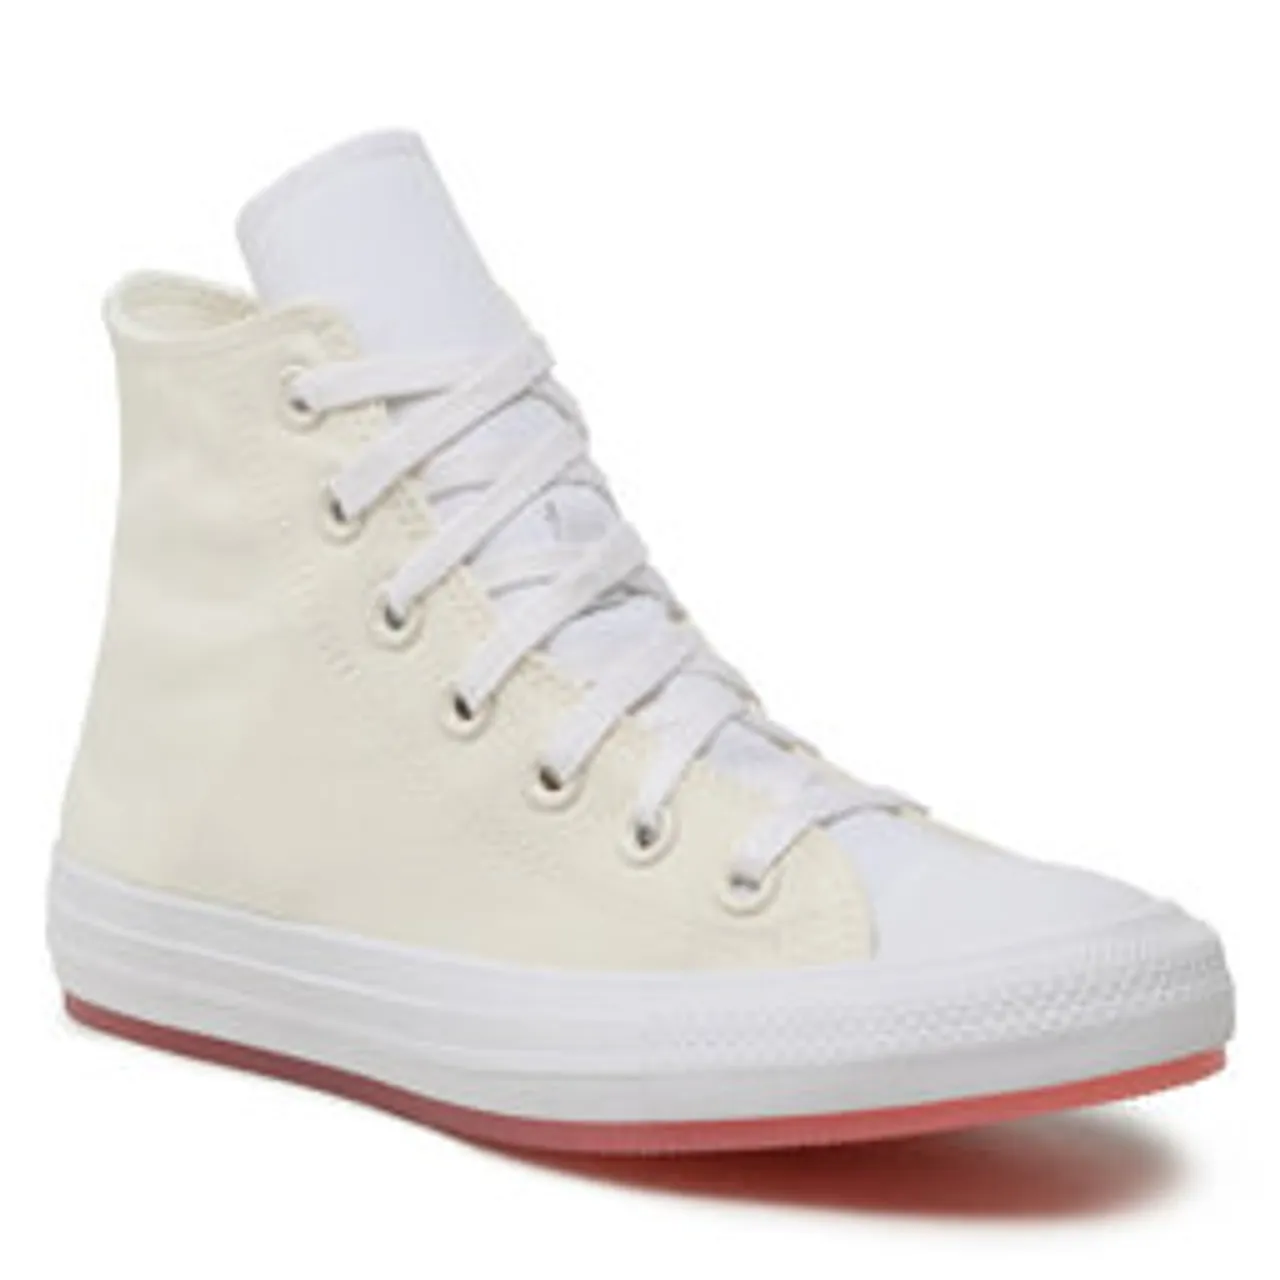 Sneakers aus Stoff Converse Chuck Taylor All Star A05021C Khaki/Off White